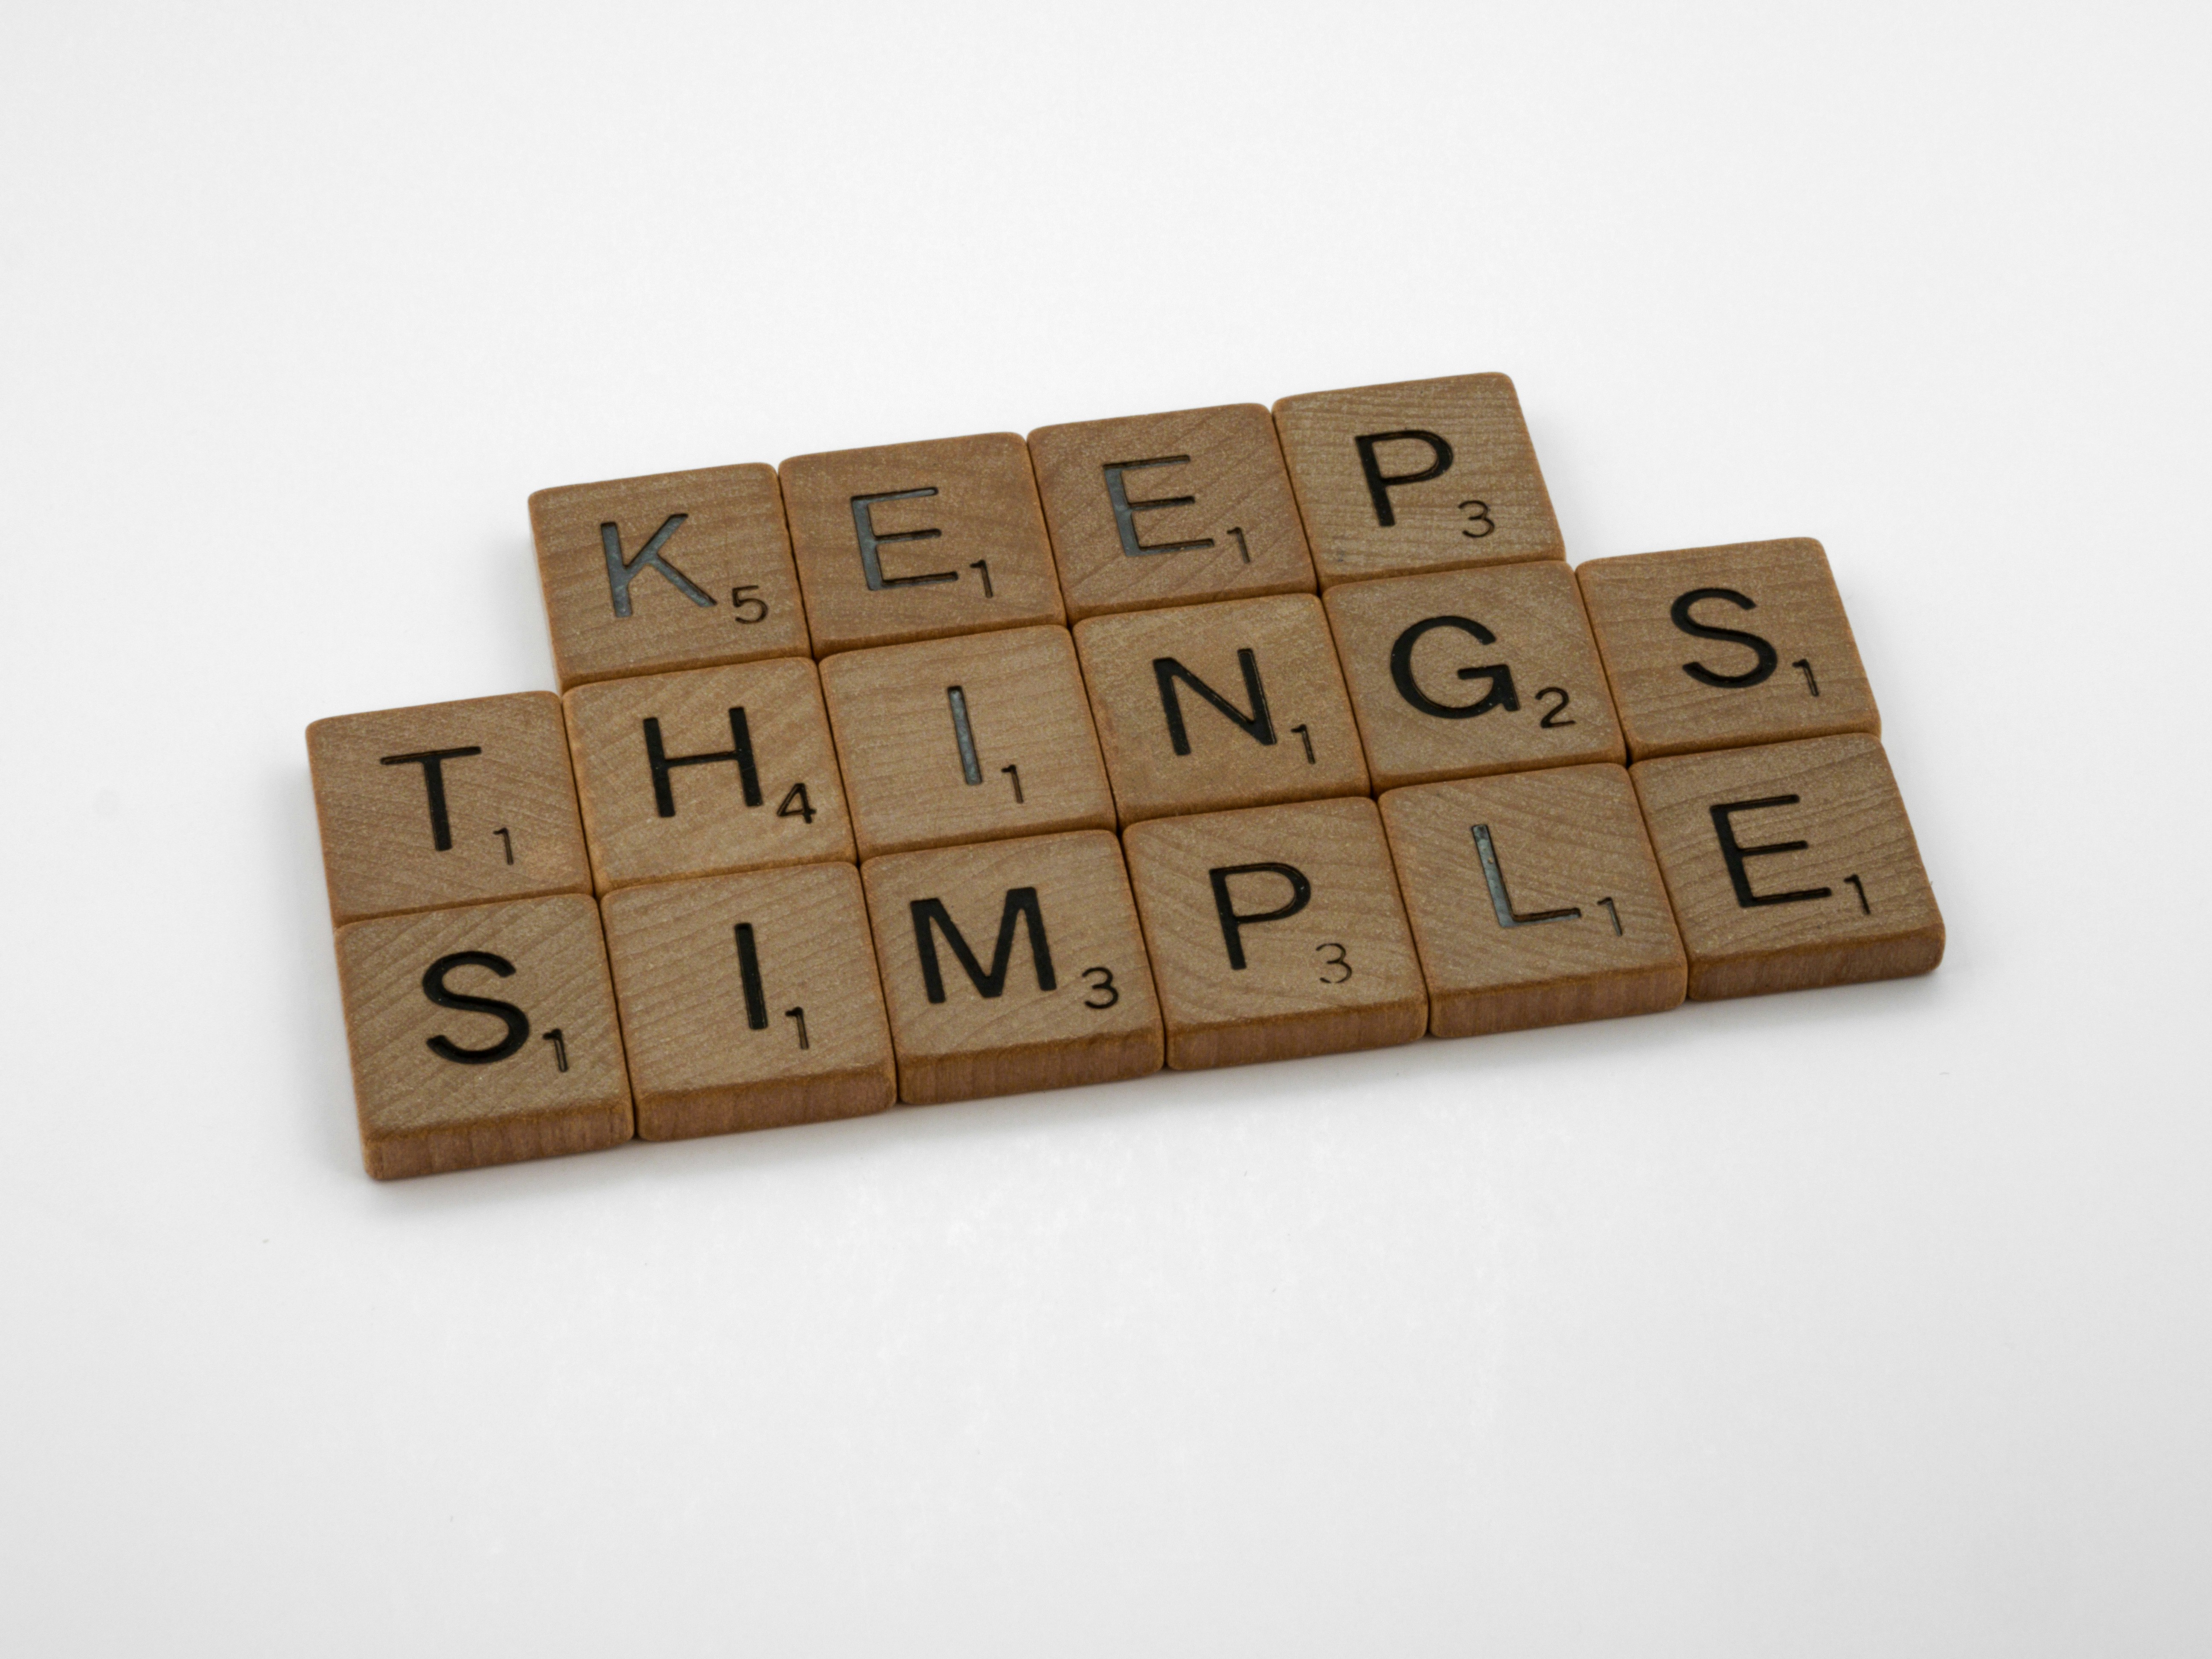 scrabble, scrabble pieces, lettering, letters, wood, scrabble tiles, white background, words, quote, letters, type, typography, design, layout, focus, bokeh, blur, photography, images, image, keep things simple, simplify, complexity, clutter, muddle, clear thinking, problem solving, secret of success, kiss, keep it simple stupid, occam razor, occam, 